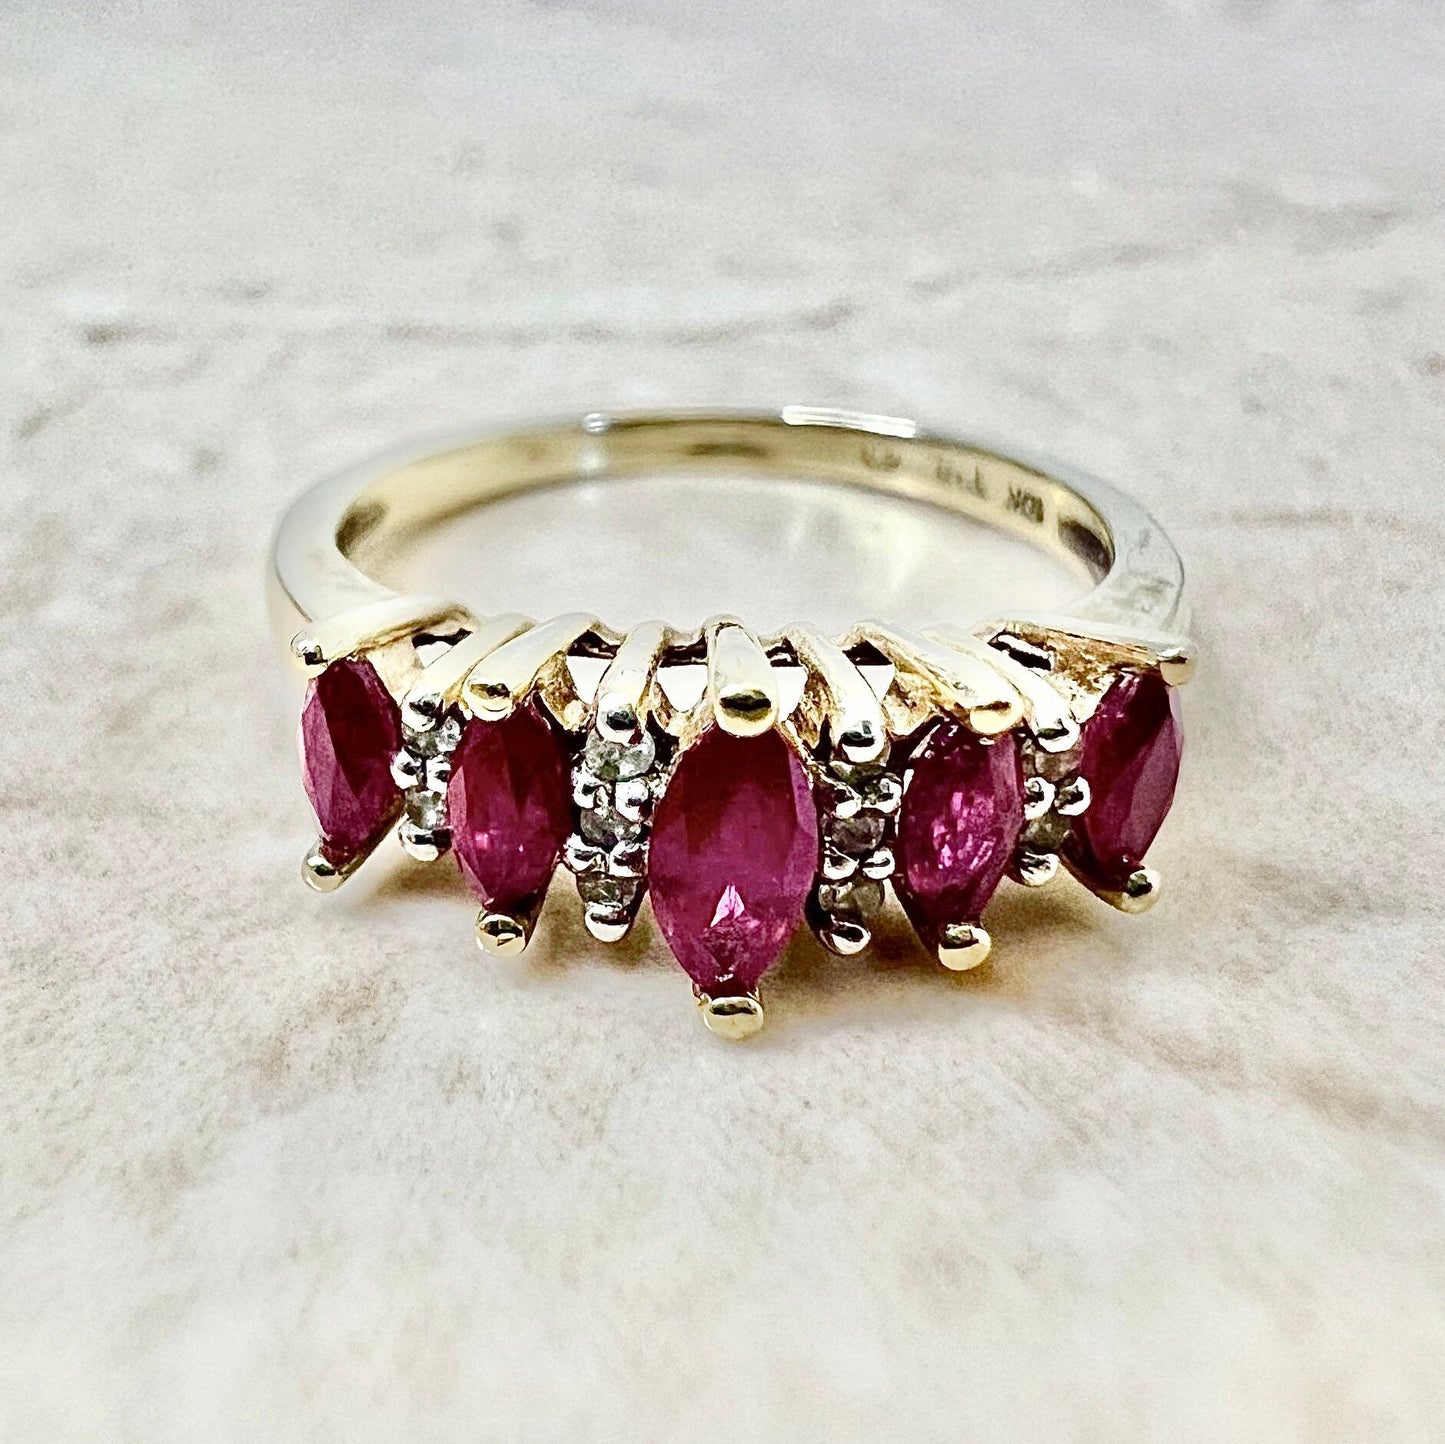 Vintage 10K Ruby & Diamond Band Ring - Yellow Gold Marquise Ruby Cocktail Ring - July Birthstone - Birthday Gift - Best Gift For Her - Sale